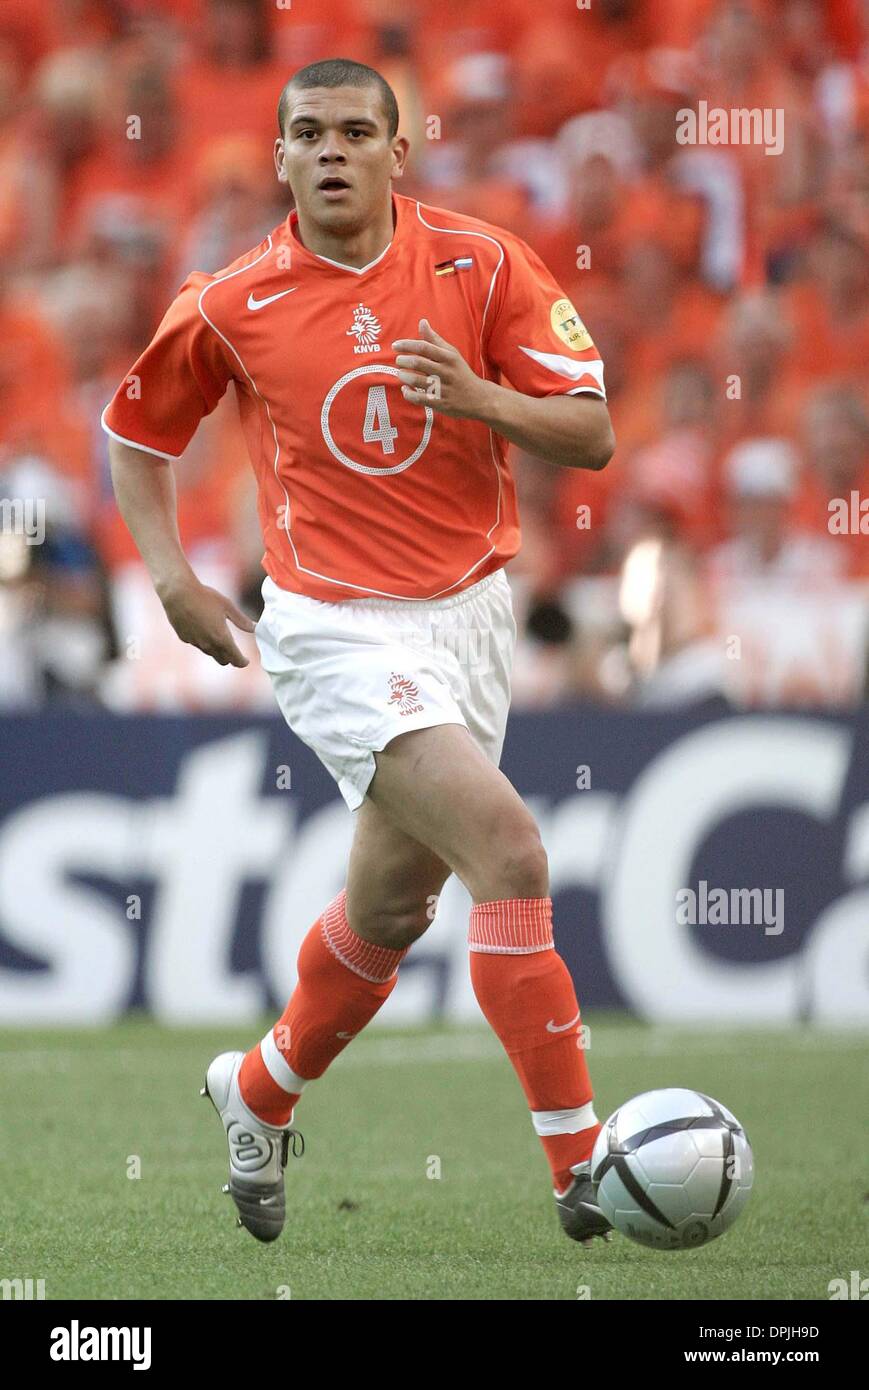 WILFRED BOUMA.HOLLAND & PSV EINDHOVEN.GERMANY V HOLLAND EURO 2004.DRAGAO STADIUM, PORTO, PORTUGAL.15/06/2004.DIF23905.K47872.WORLD CUP PREVIEW 2006 Stock Photo